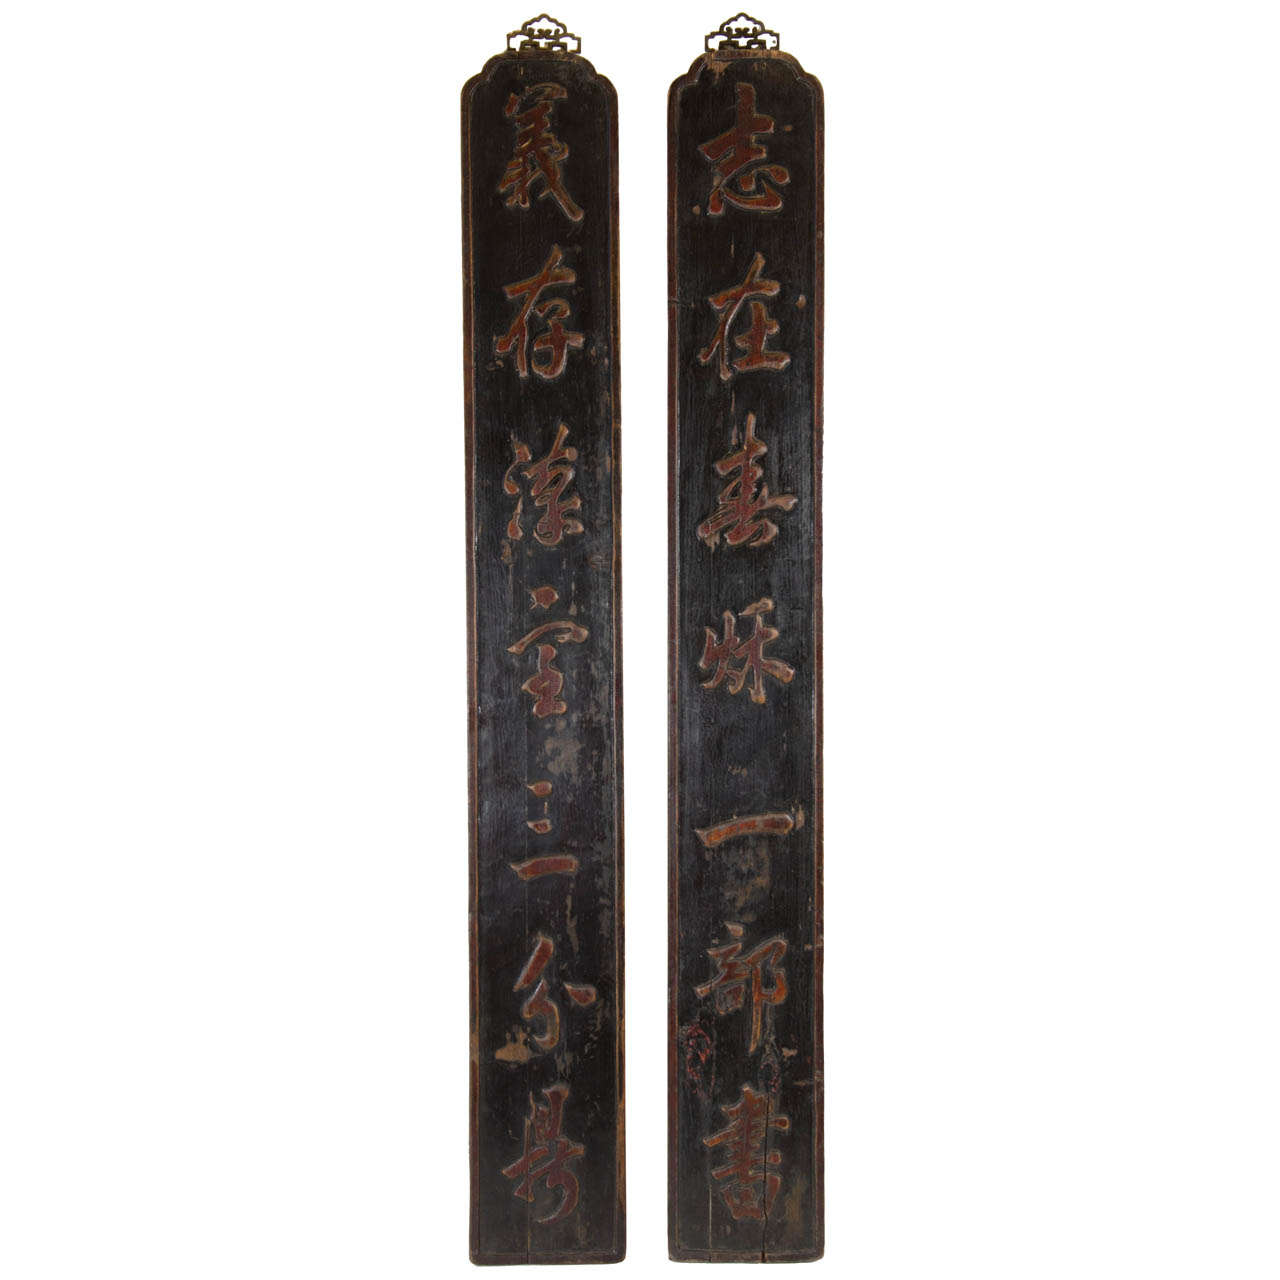 Pair of 19th Century Calligraphy Signs